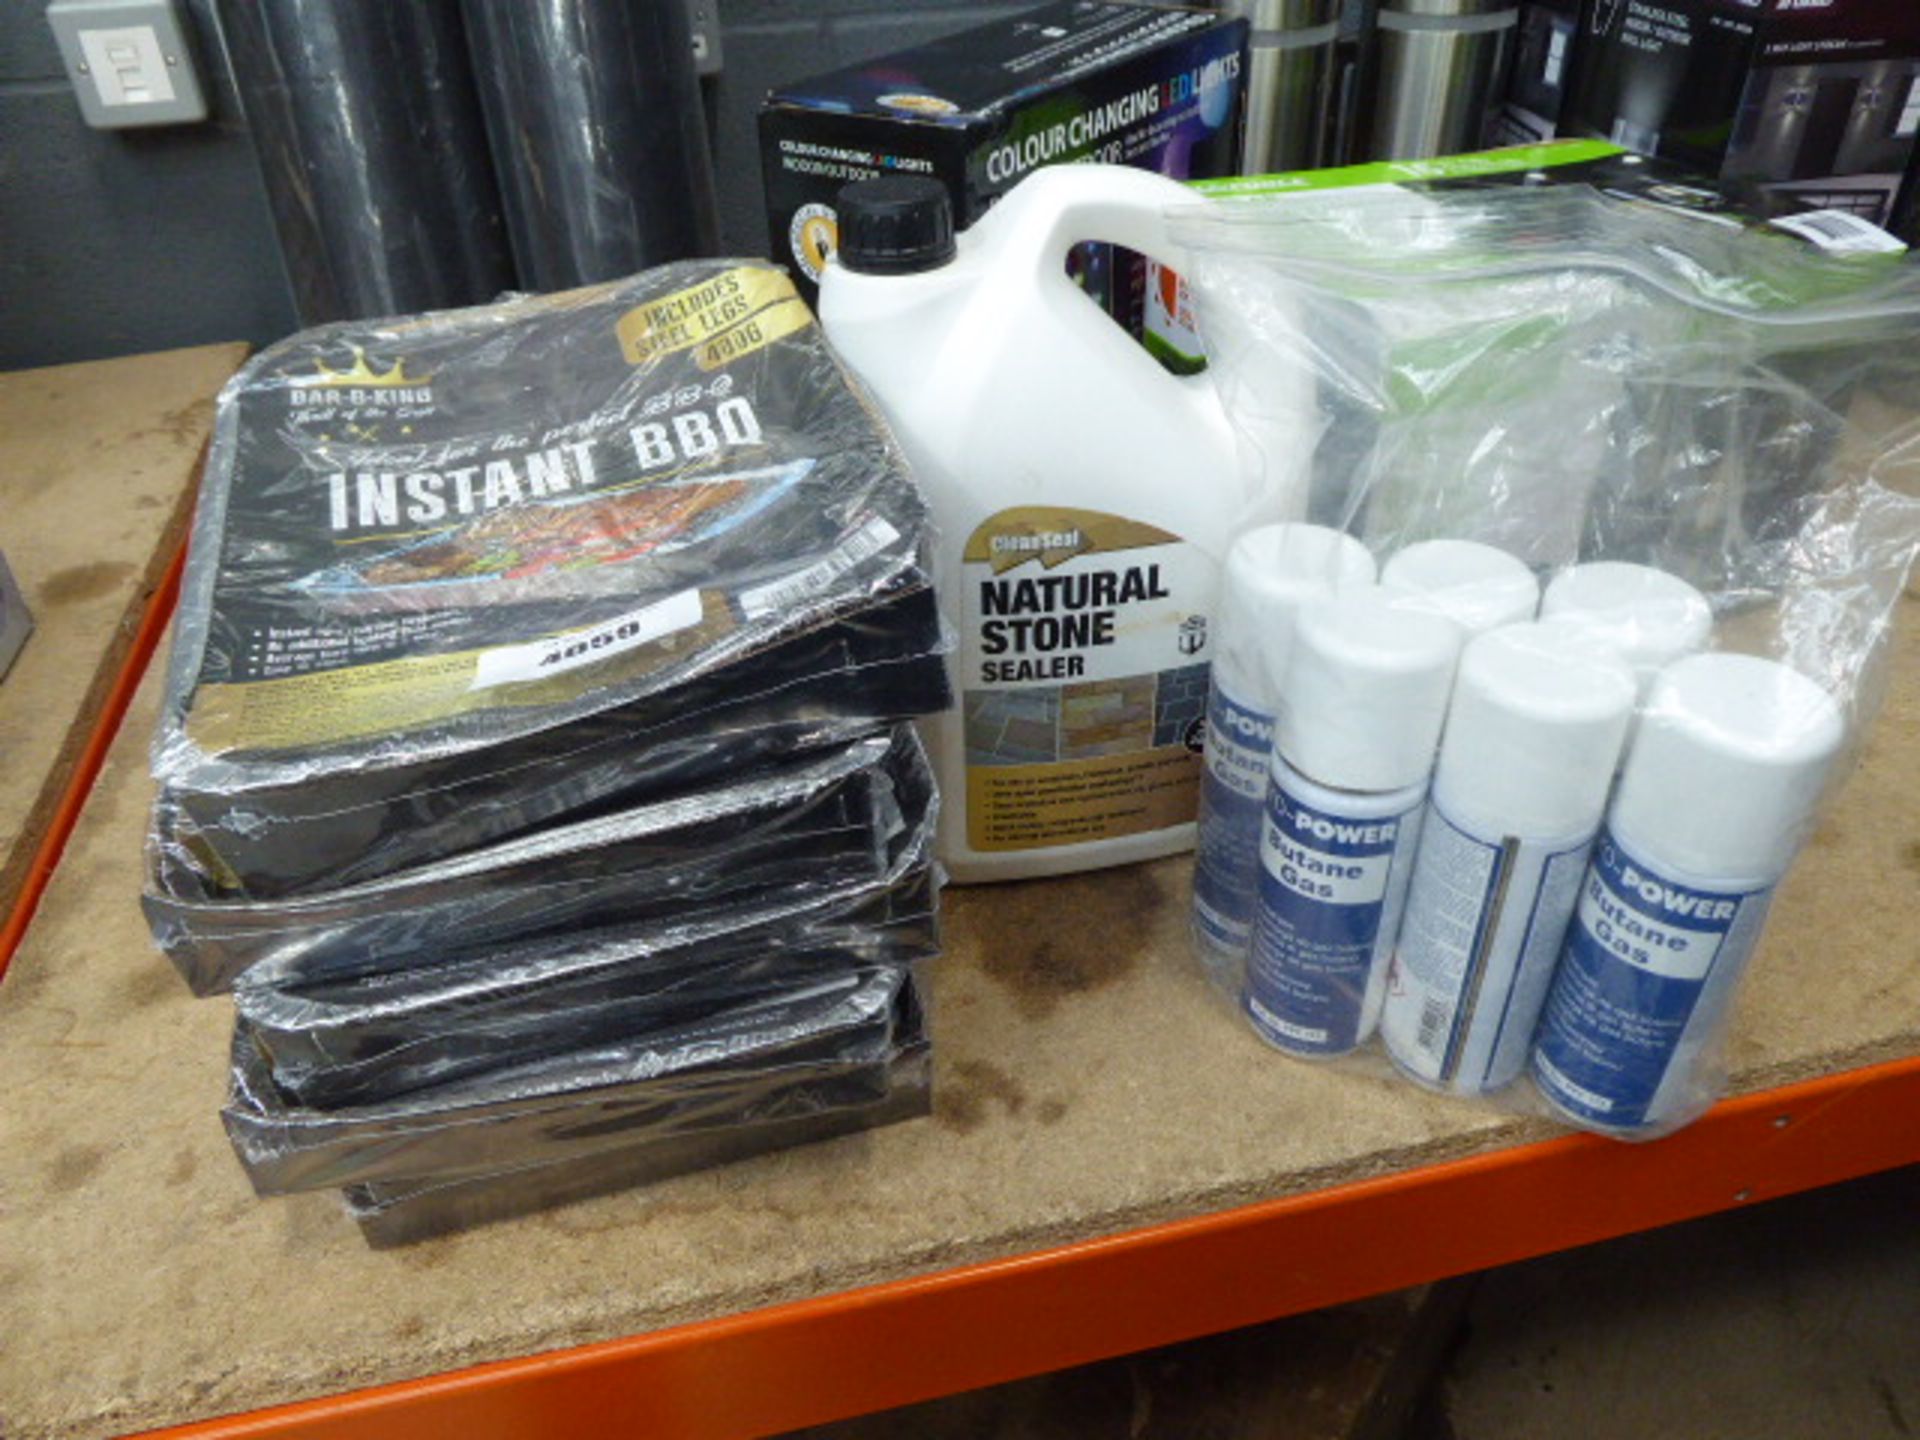 5 small instant BBQs, butane gas, and natural stone sealer